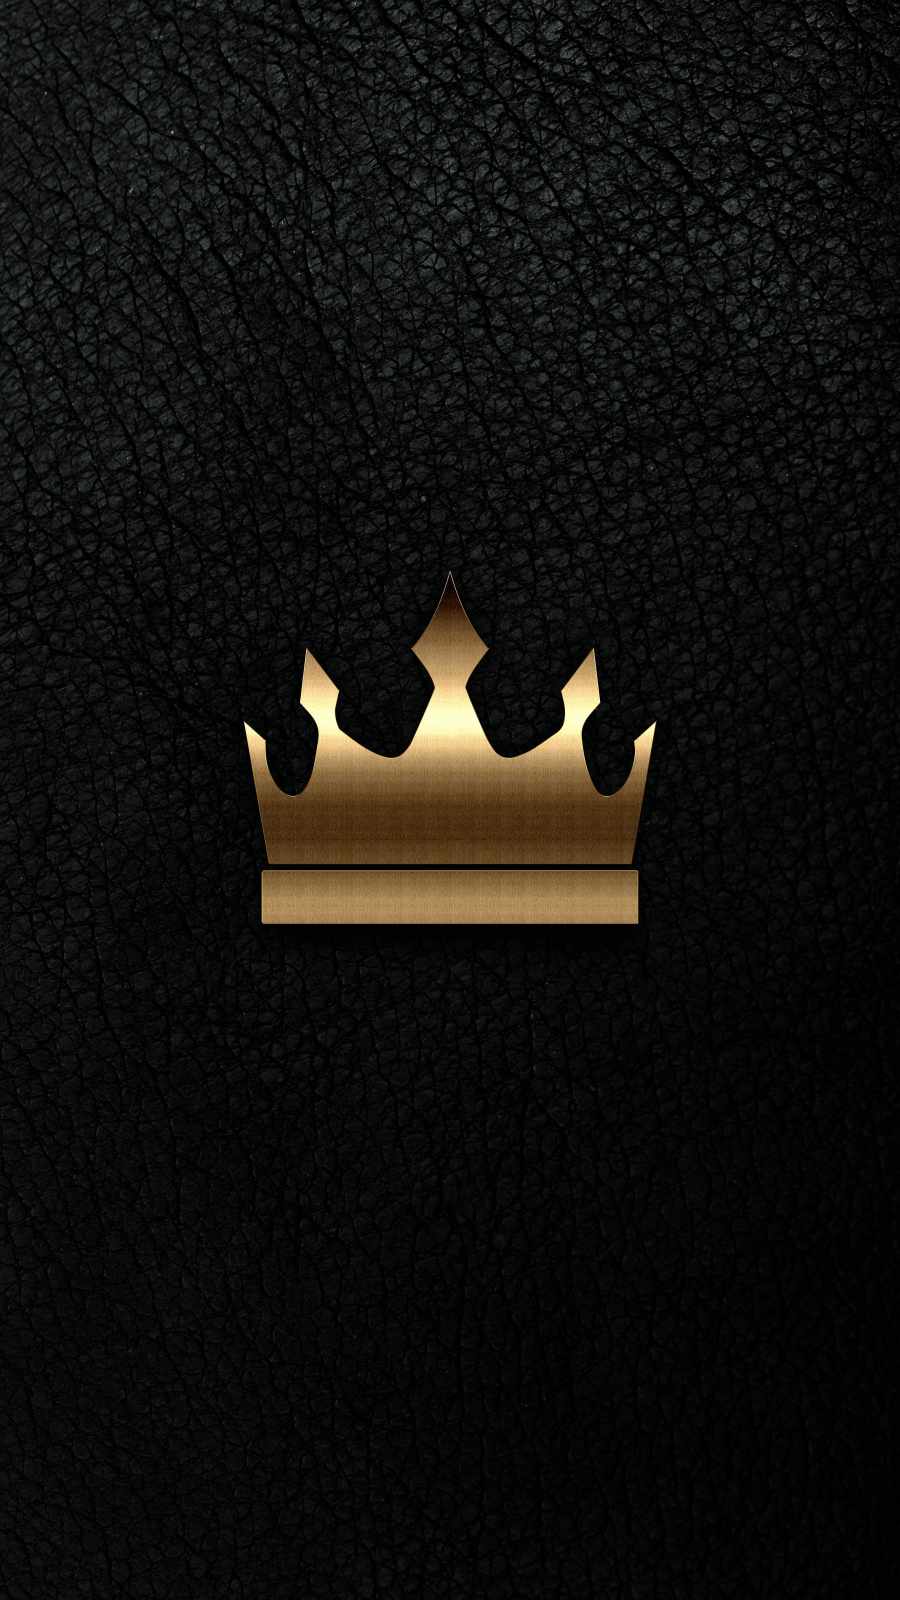 Gold Crown iPhone Wallpaper